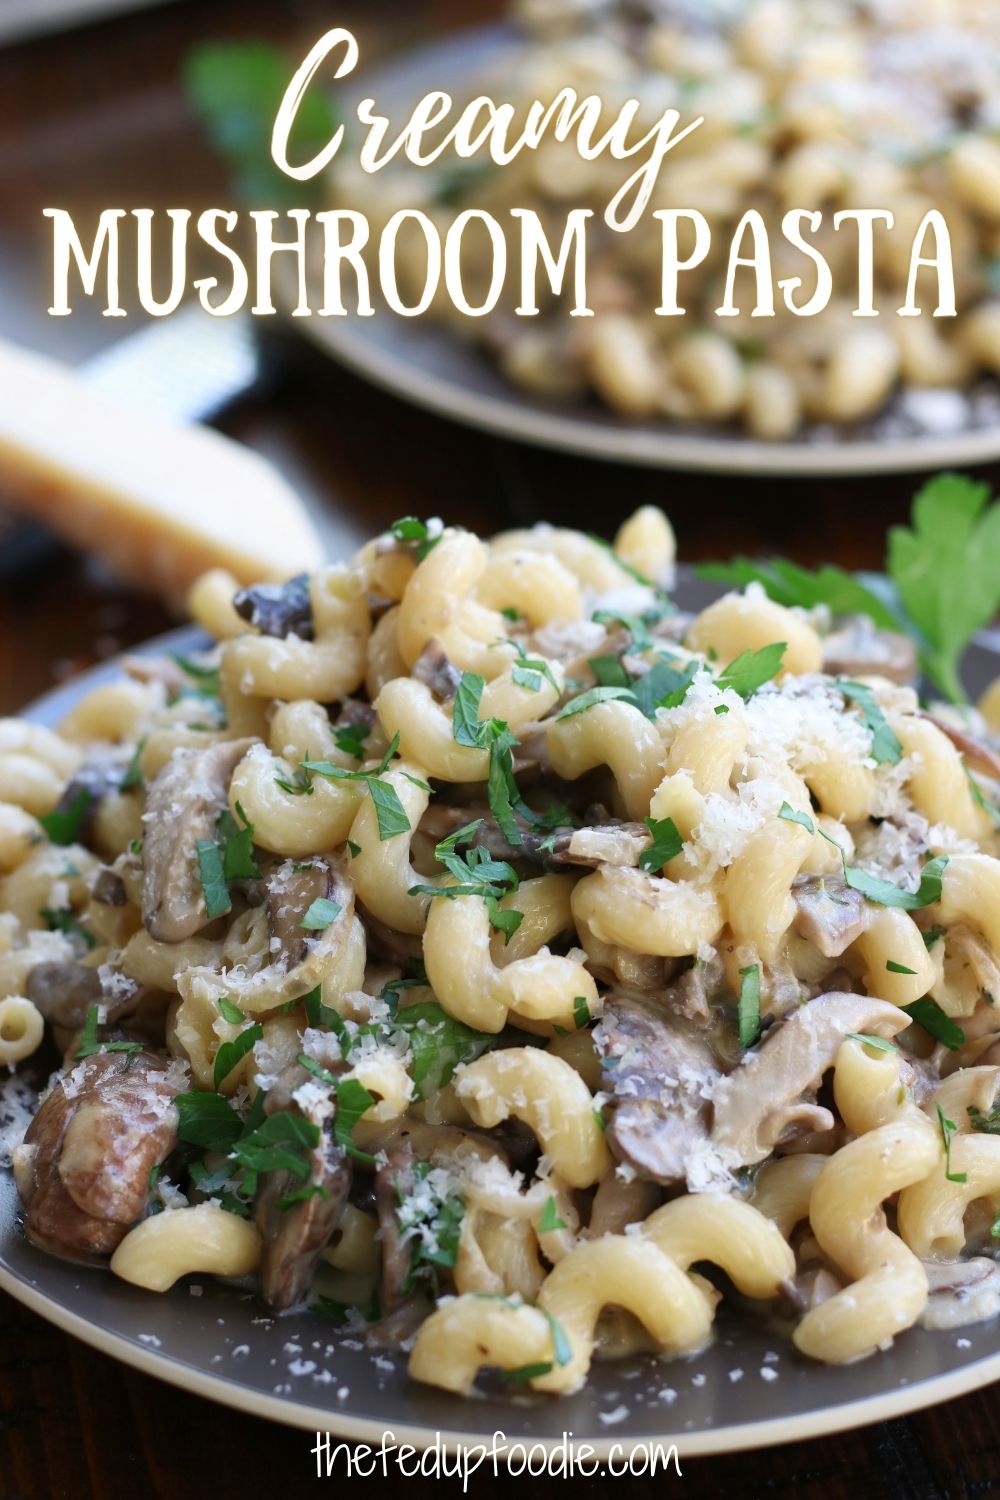 Creamy Mushroom Pasta is an easy and luxurious dinner with garlic, caramelized onion and lemon. With the perfect amount of creaminess, this pasta is great for special occasions and yet is simple enough for week nights.  
#CreamyMushroomPasta #CreamyMushroomSauce #CreamyMushroomPastaEasy #MushroomPasta #CarmalizedOnionAndMushroomPasta #CarmelizedOnionMushroomPasta #GarlicMushroomPasta